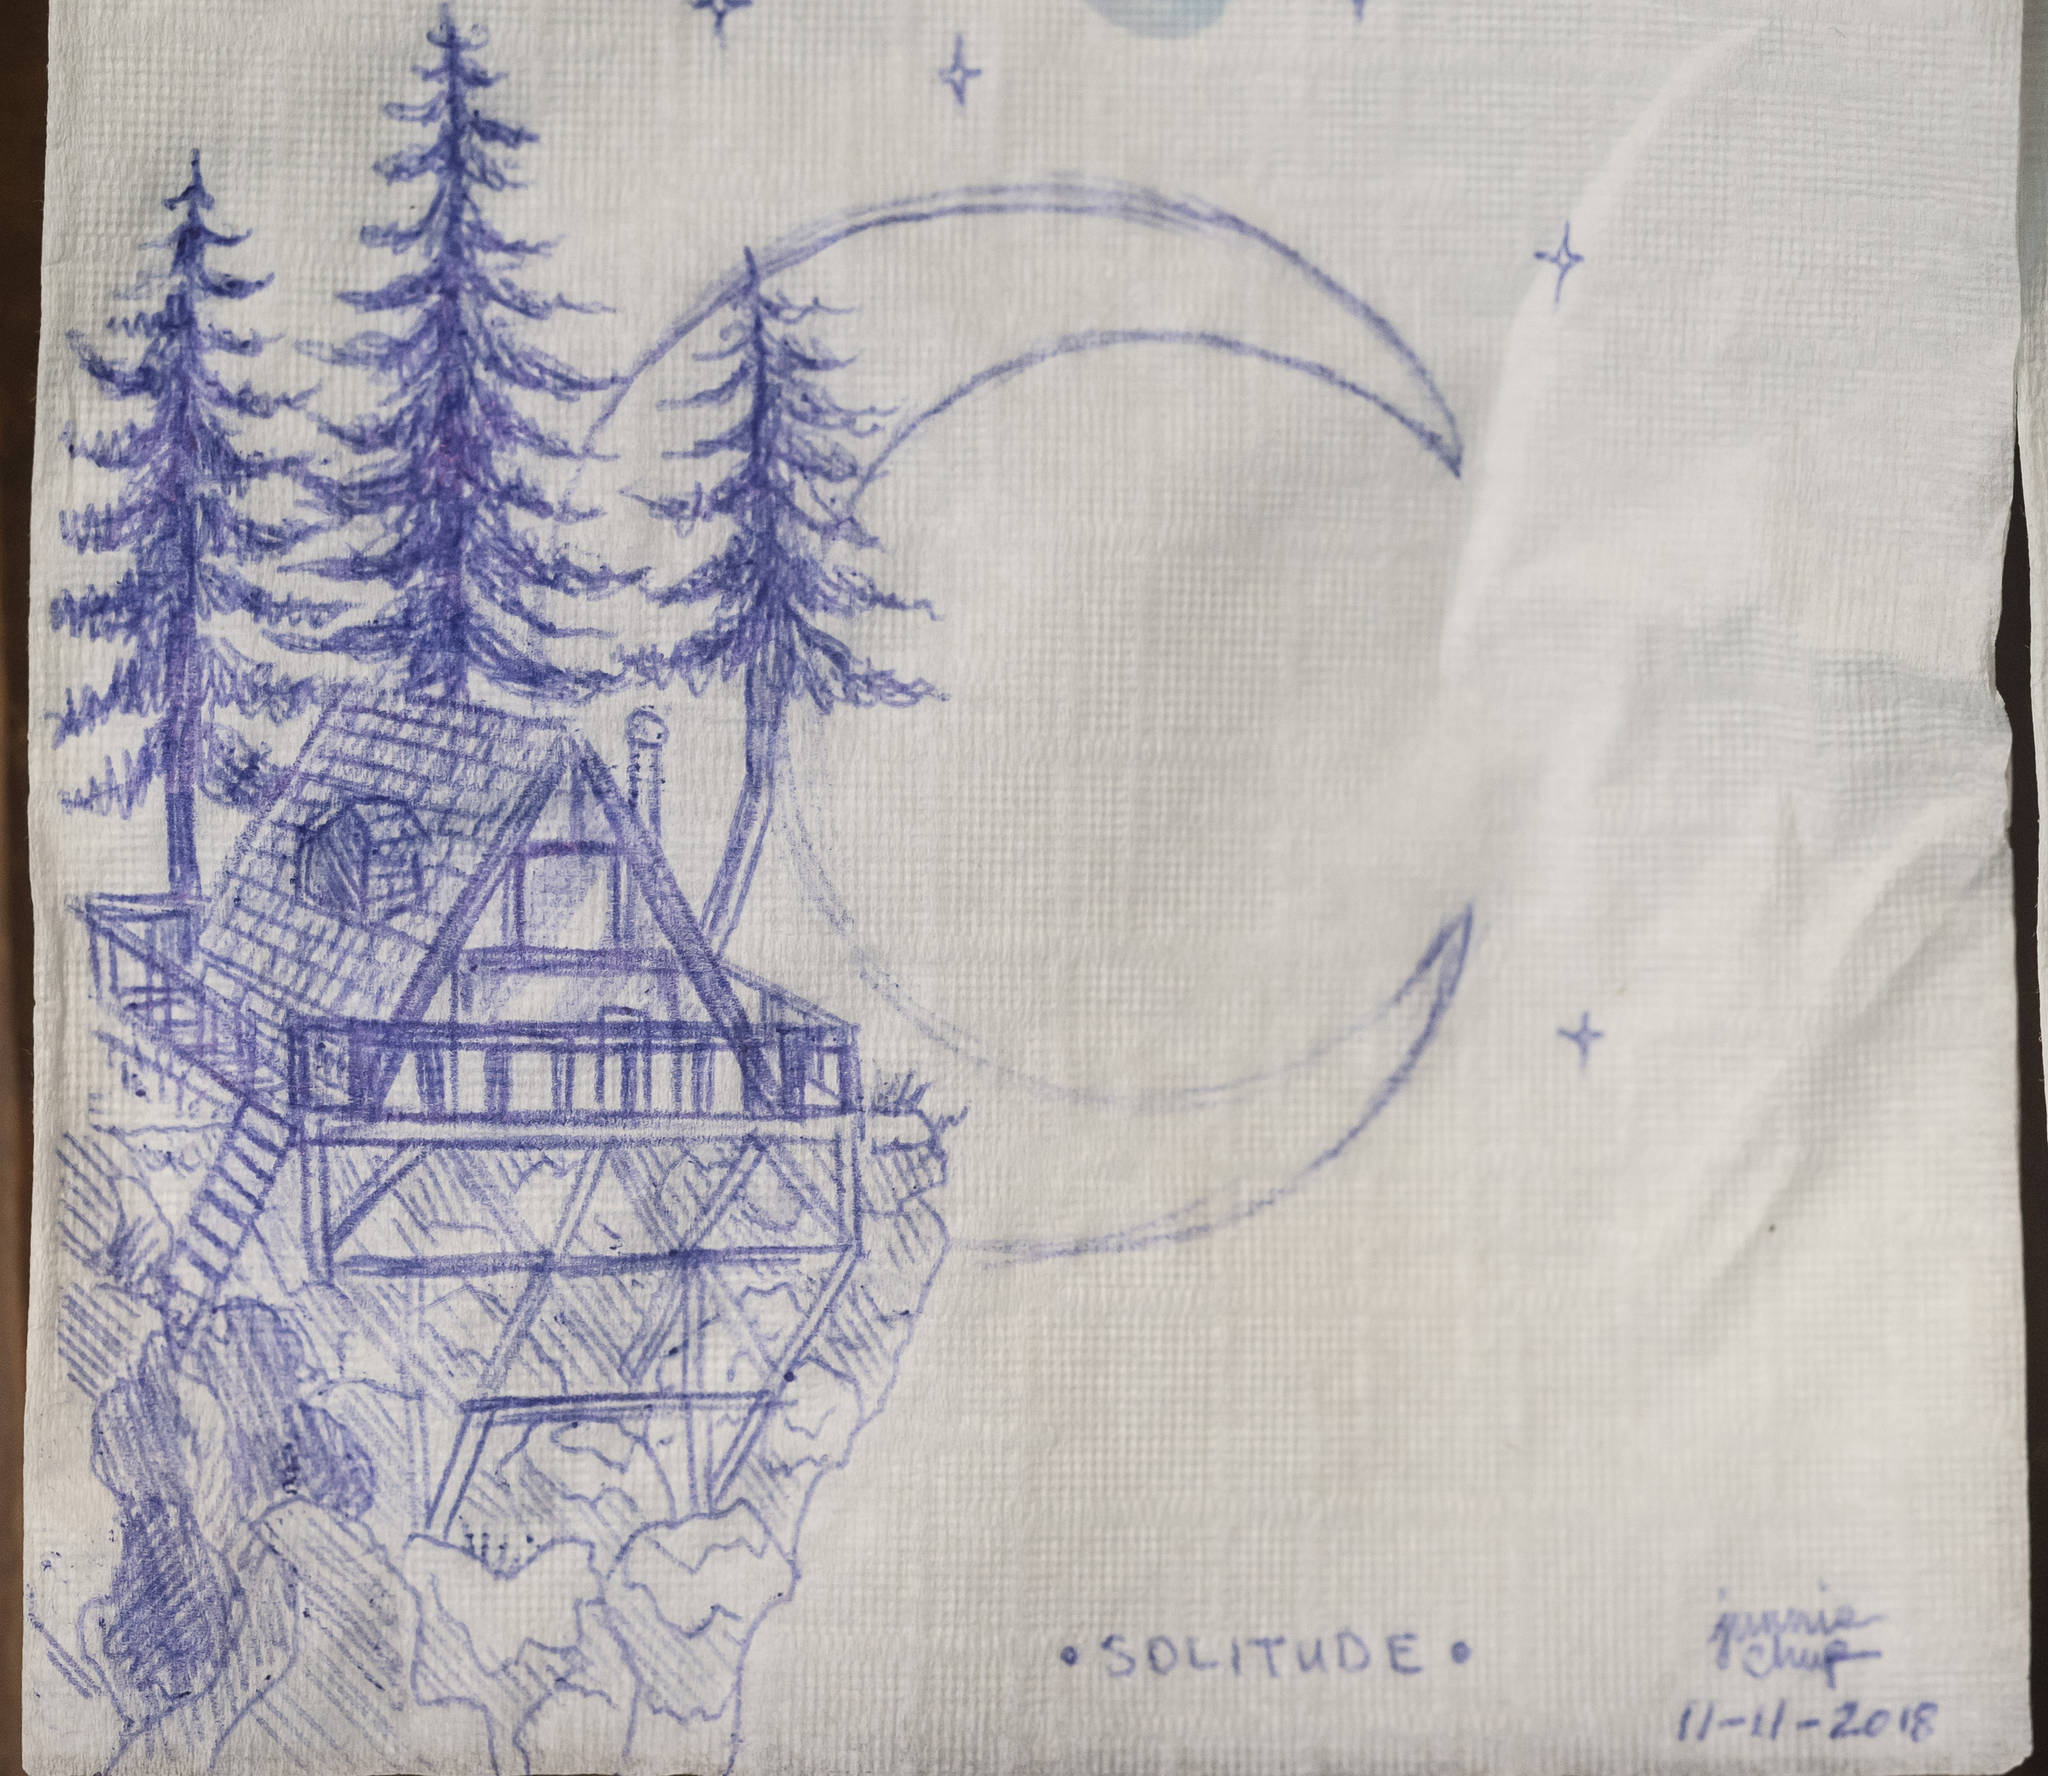 The Triangle Club Bar’s annual napkin art contest will start this week for First Friday, Winners Will be announced during Gallery Walk in December. This drawing was an entry in the 2018 contest. (Michael Penn | Juneau Empire File)